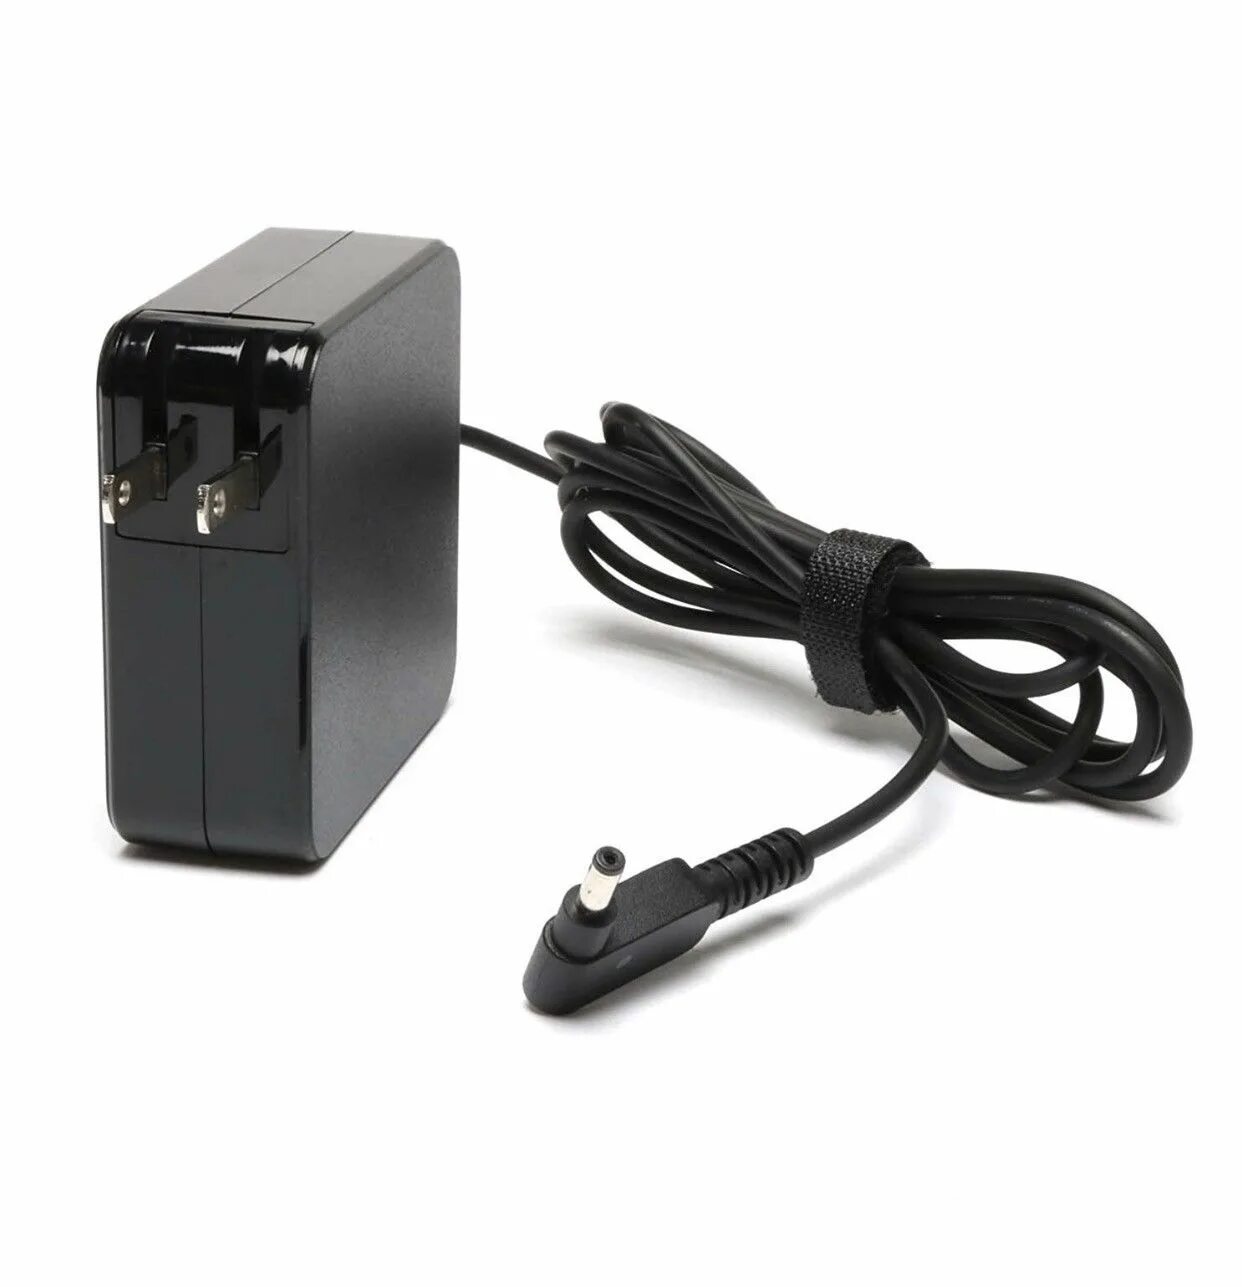 Зарядники асус. ASUS ux31 зарядное. Адаптер ASUS 19v 3.42a 4*1.35. AC Adapter for ASUS ZENBOOK pa-1650-66 ADP-65aw a 4.0mm*1.35mm 65w Laptop Power. ASUS AC Adapter 65w.